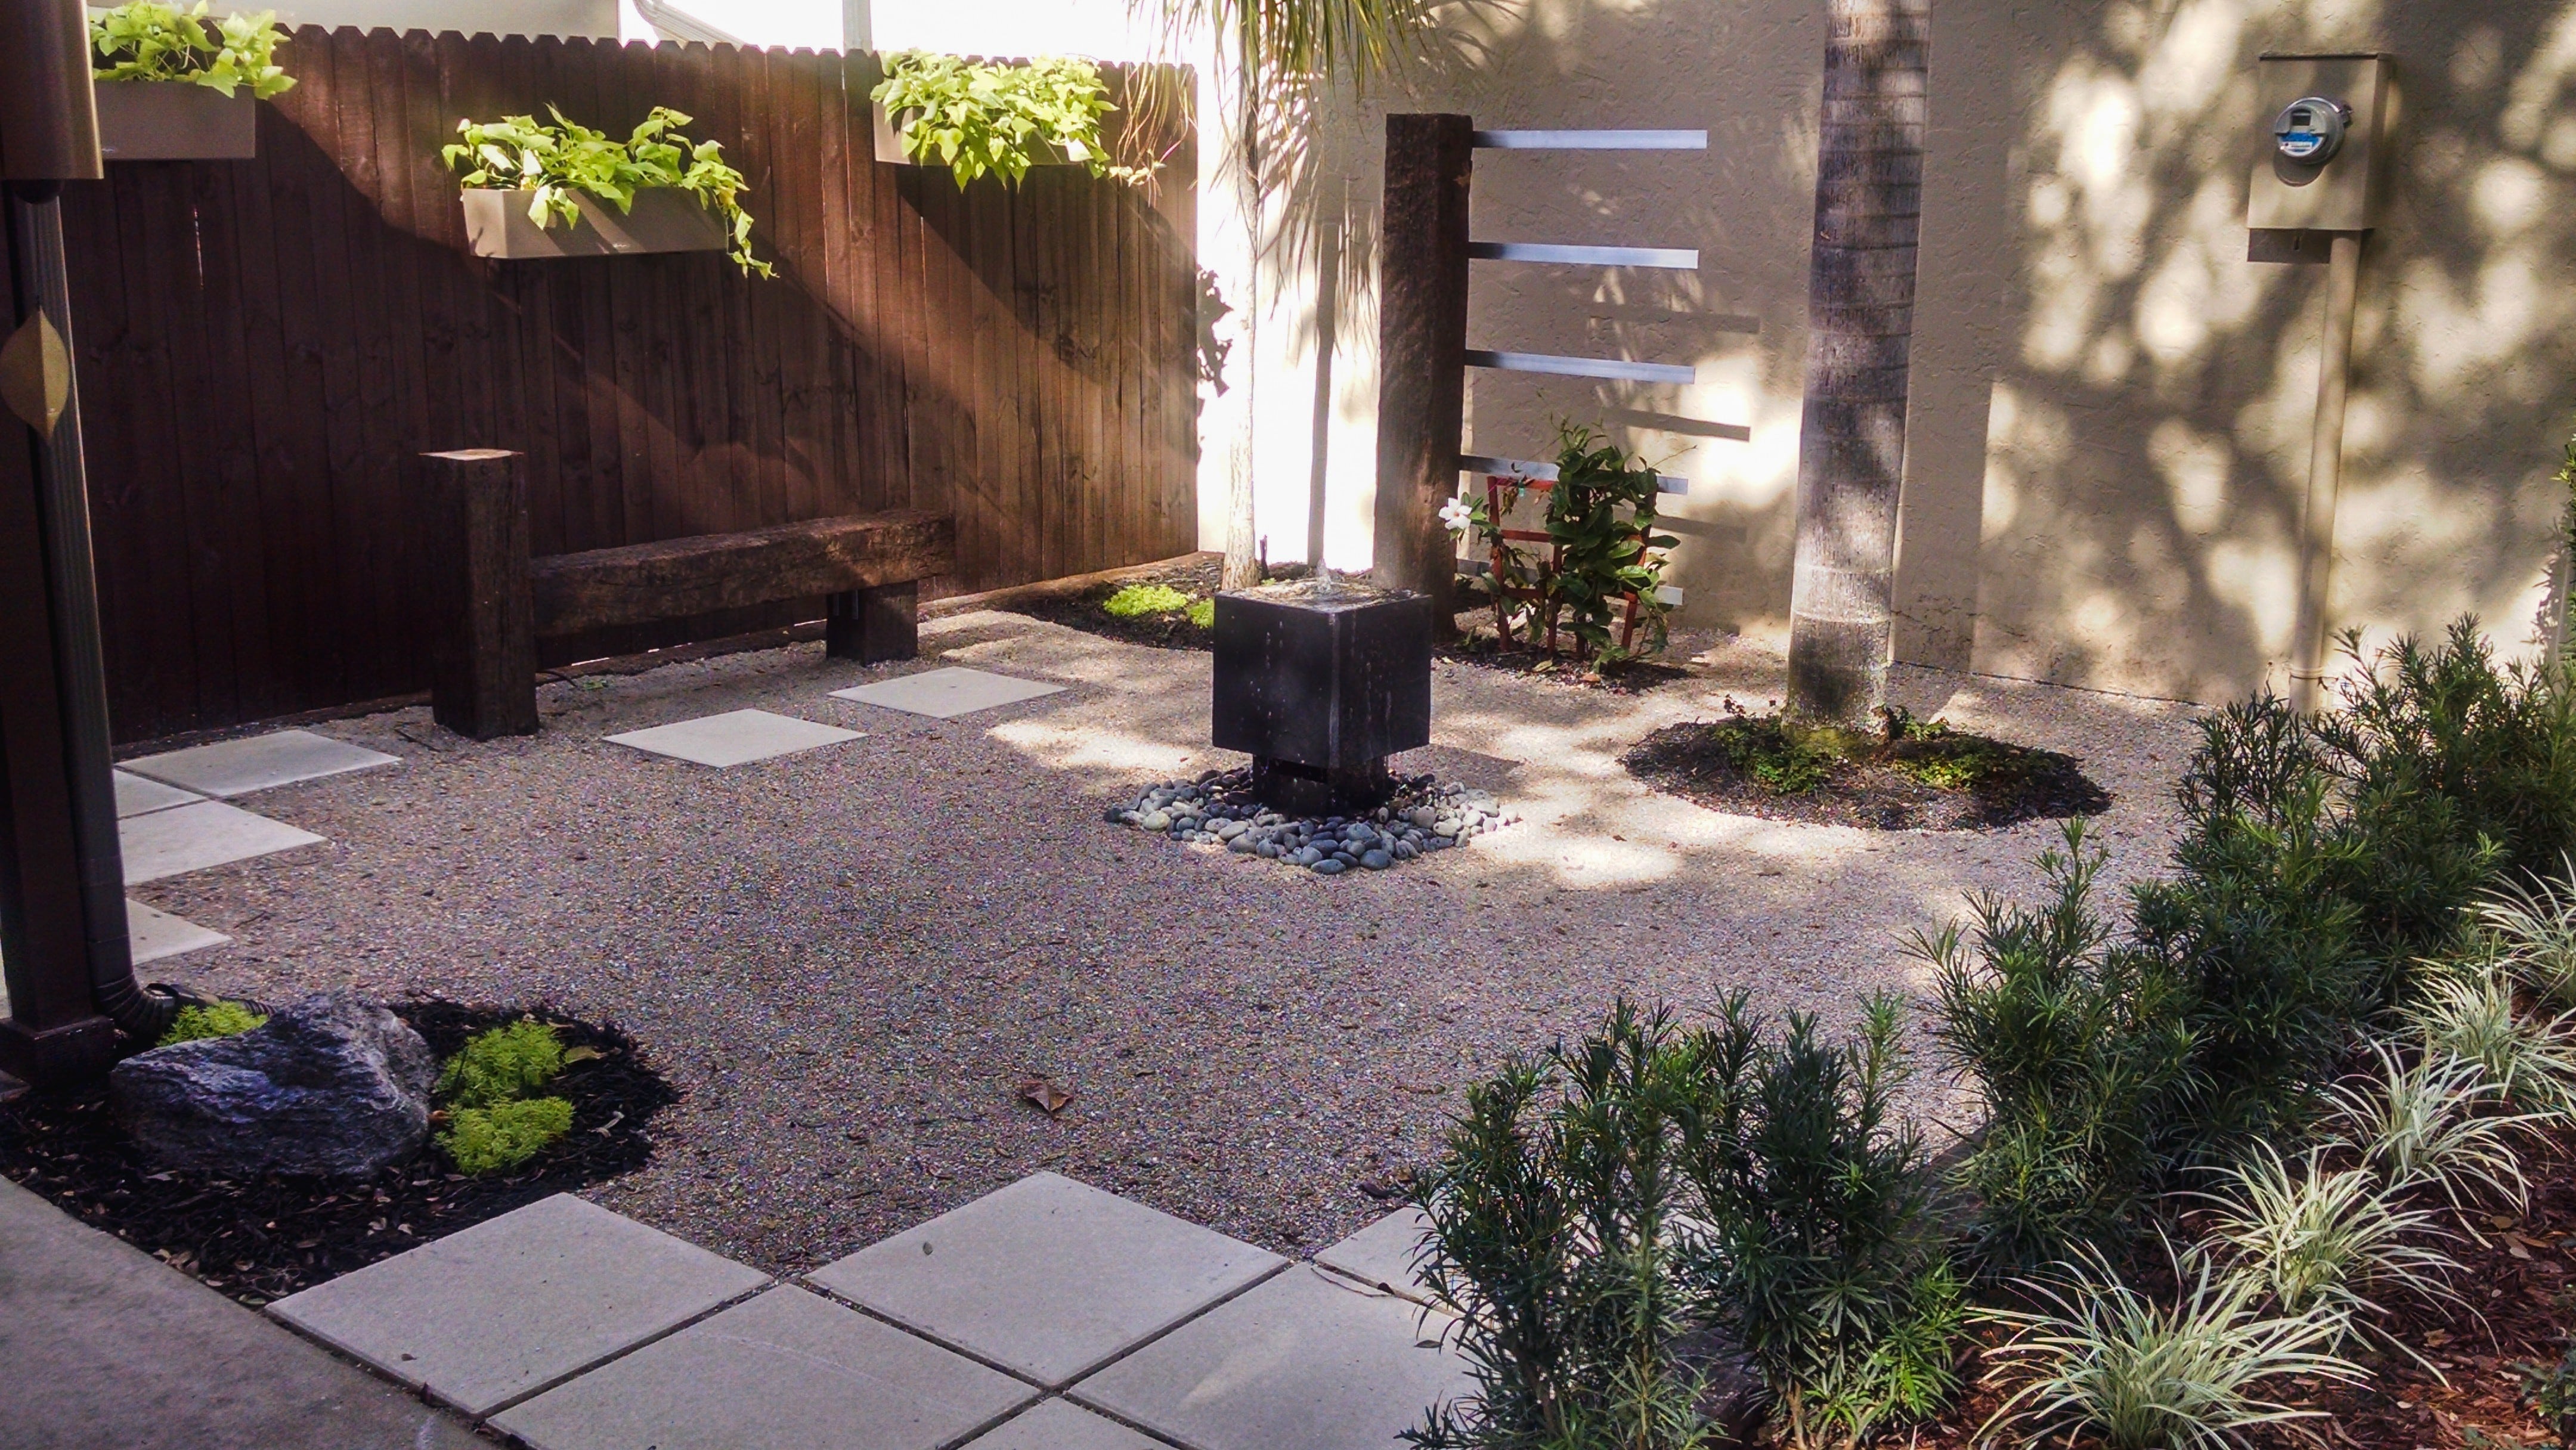 meditative minimalist rock garden with water fountain, hanging planter boxes and flower beds